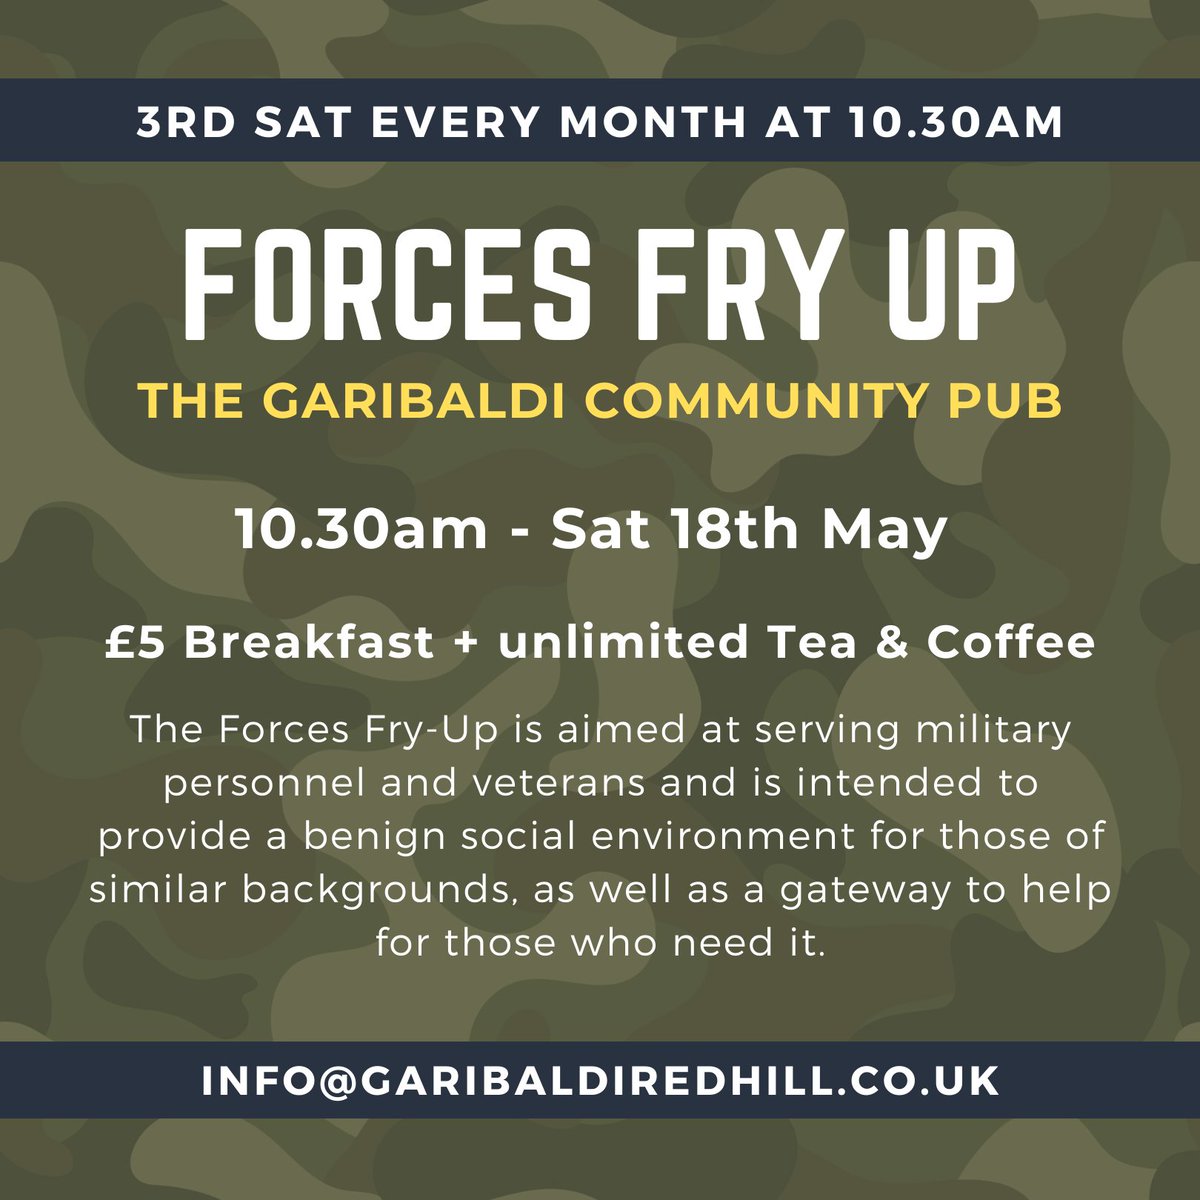 FORCES FRY UP: 10.30am - Sat 18th May. Booking essential, please email or ask at the bar. Info@garibaldiredhill.co.uk